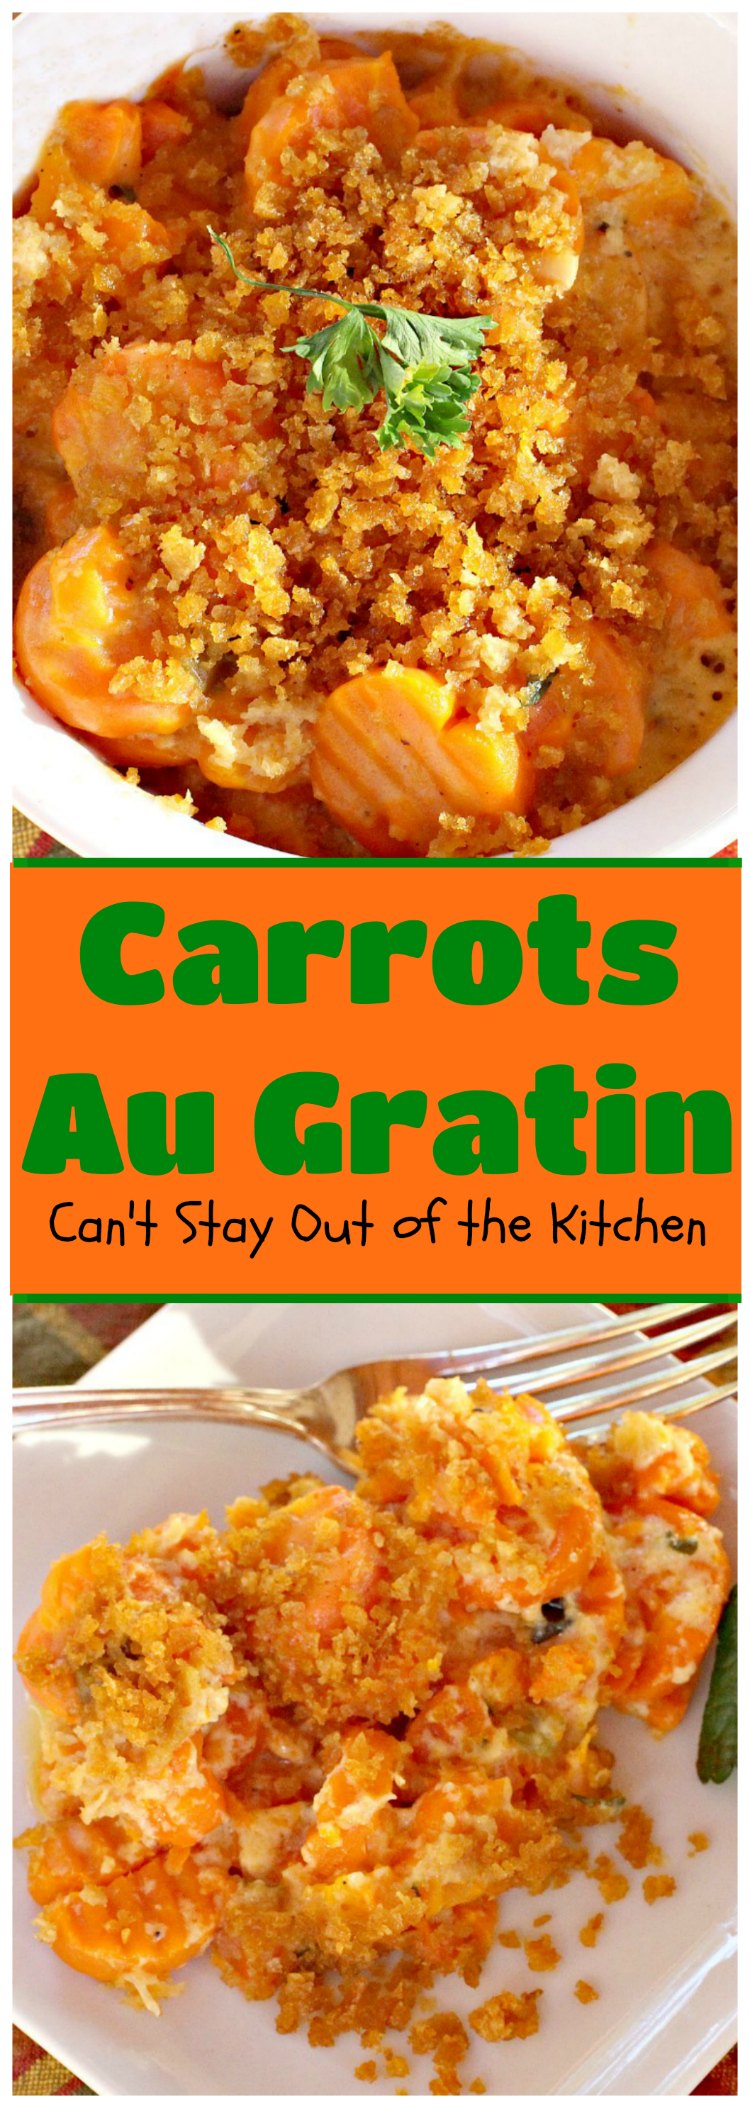 Carrots Au Gratin | Can't Stay Out of the Kitchen